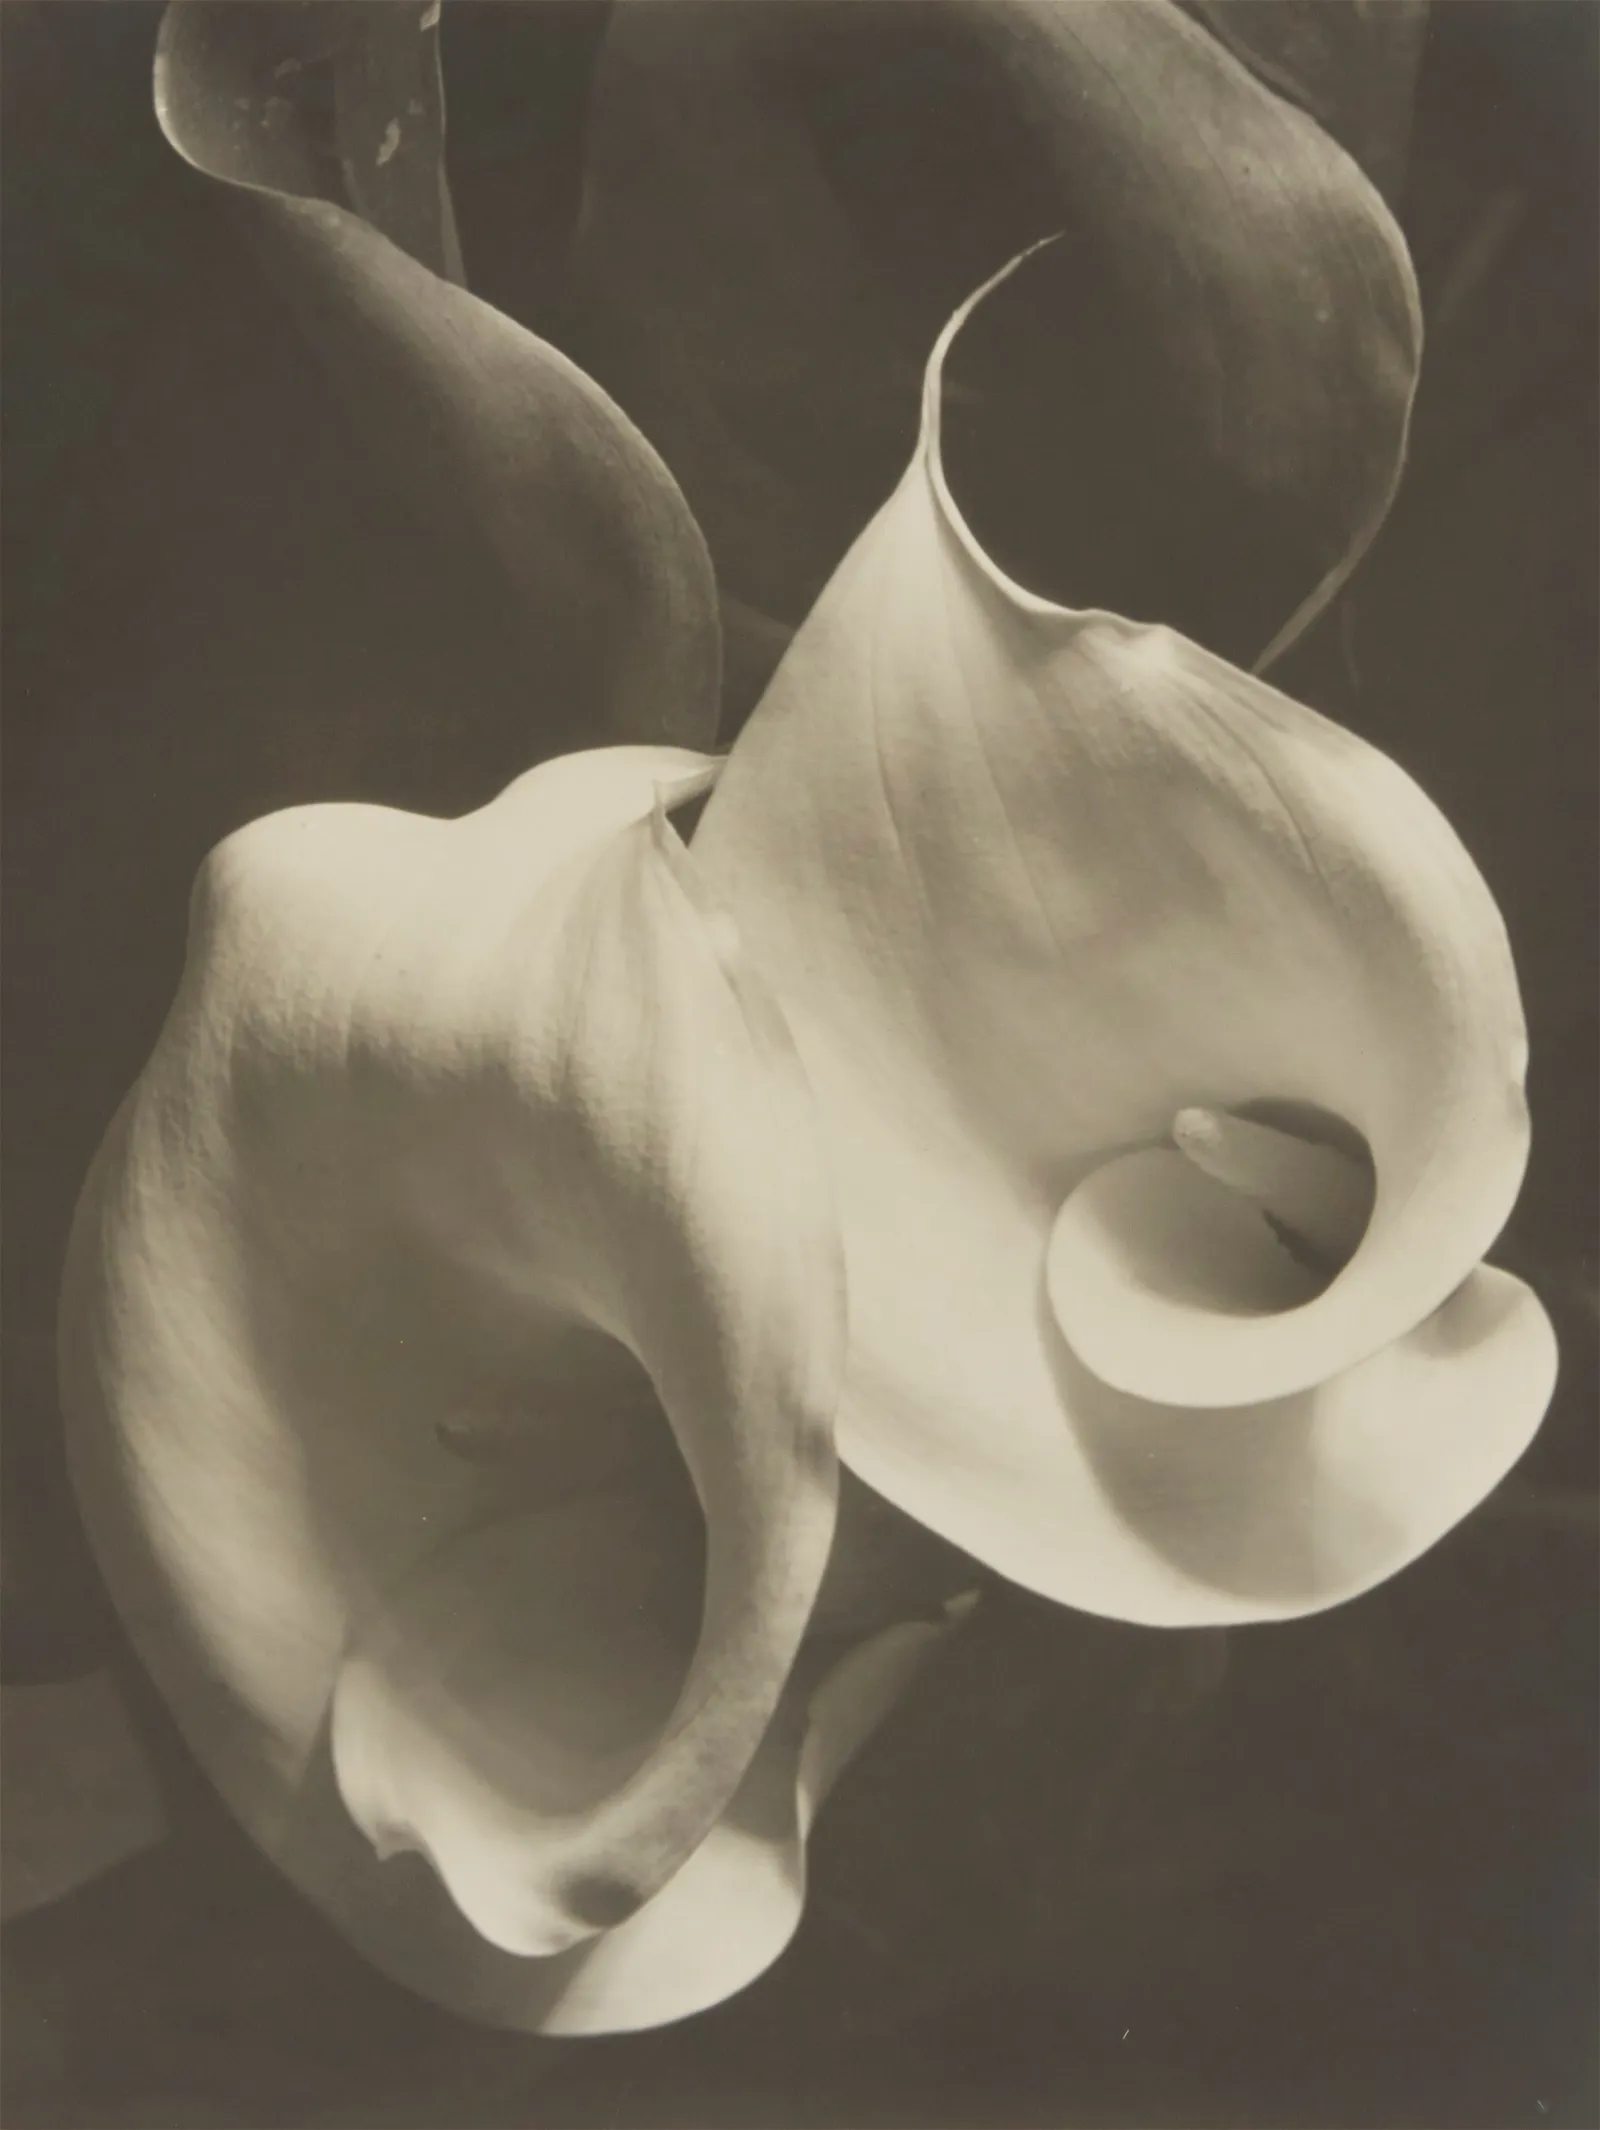 Imogen Cunningham and Edward Weston claimed the top spots at John Moran